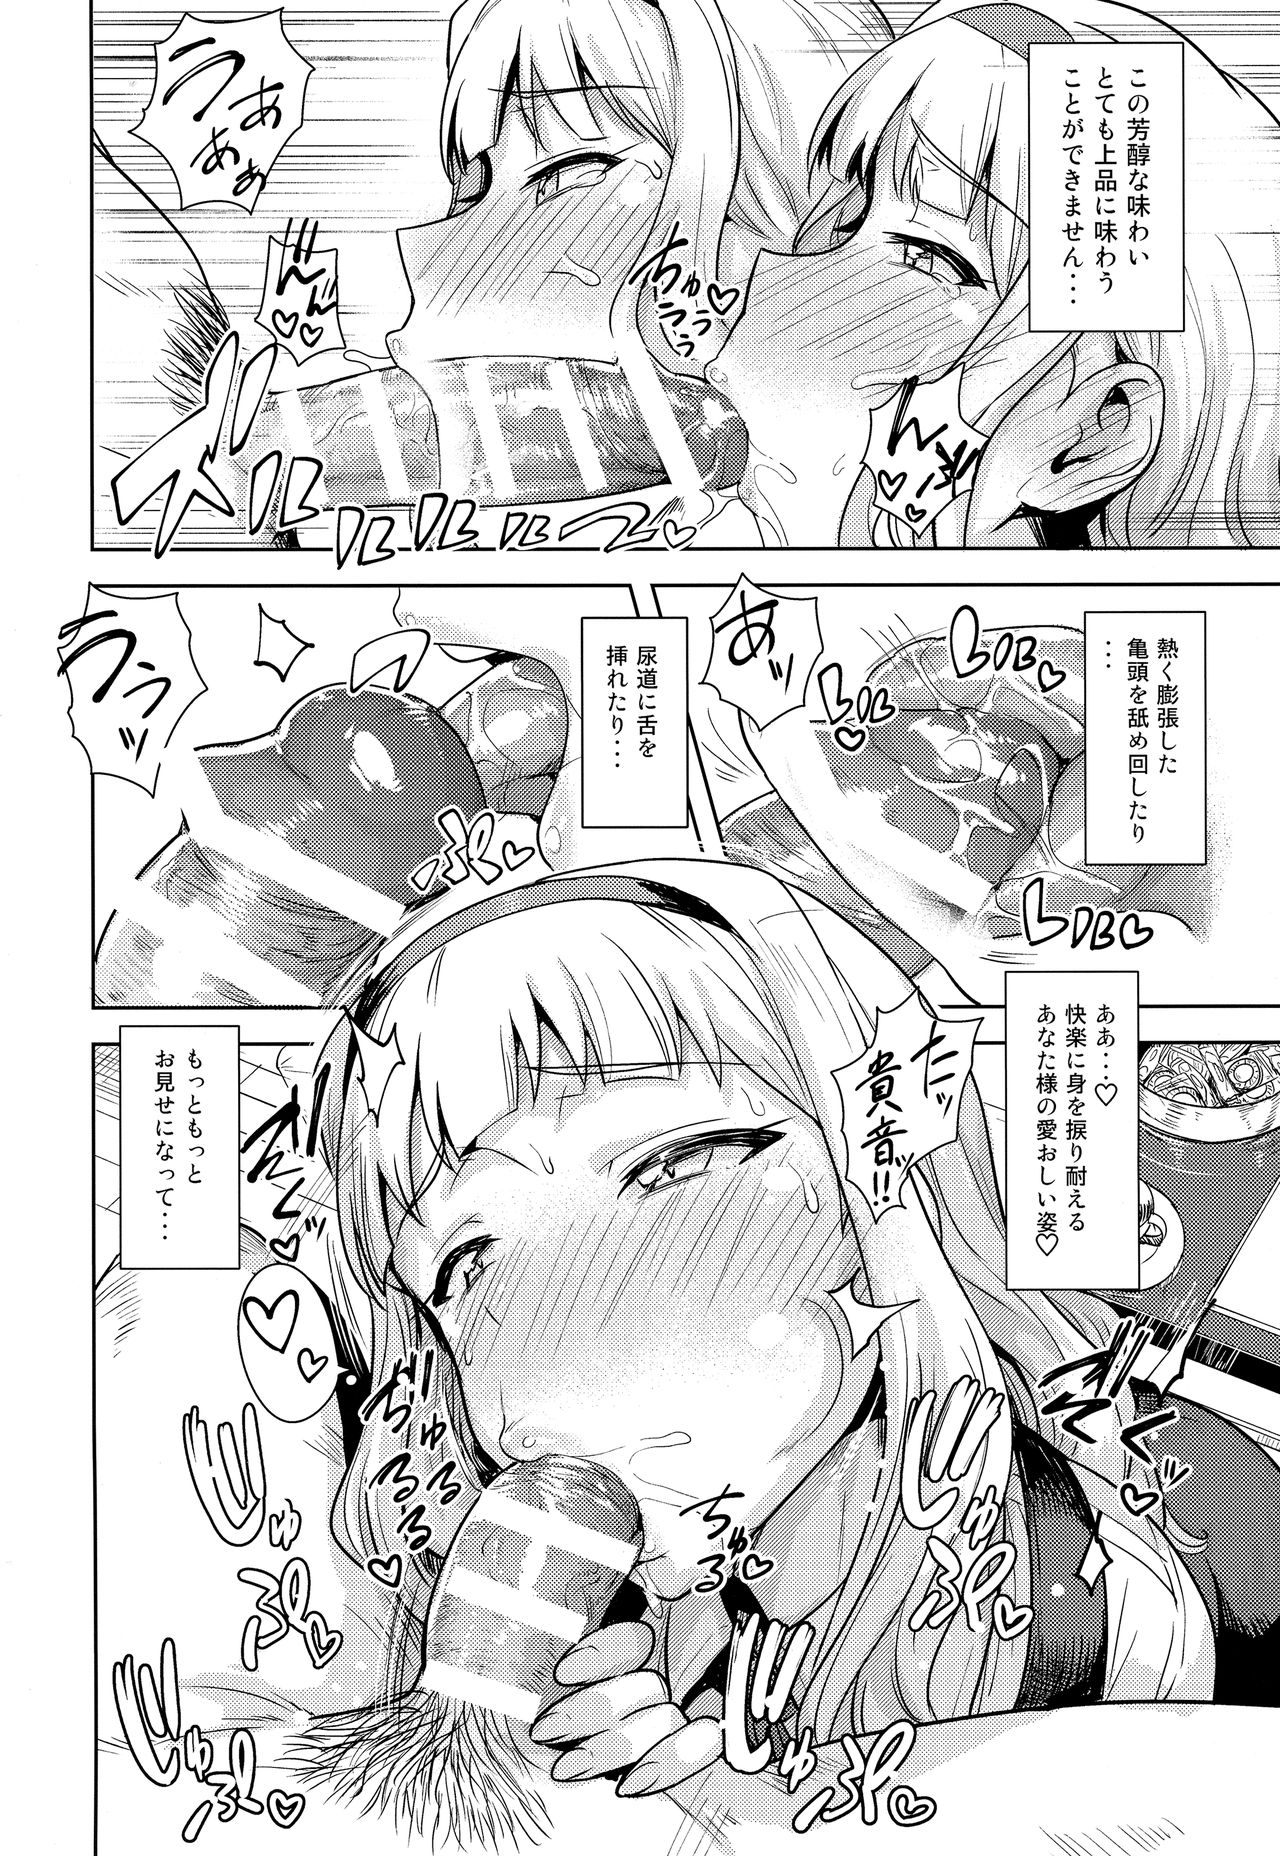 [PLANT (Tsurui)] SWEET MOON 2 (THE IDOLM@STER) page 15 full